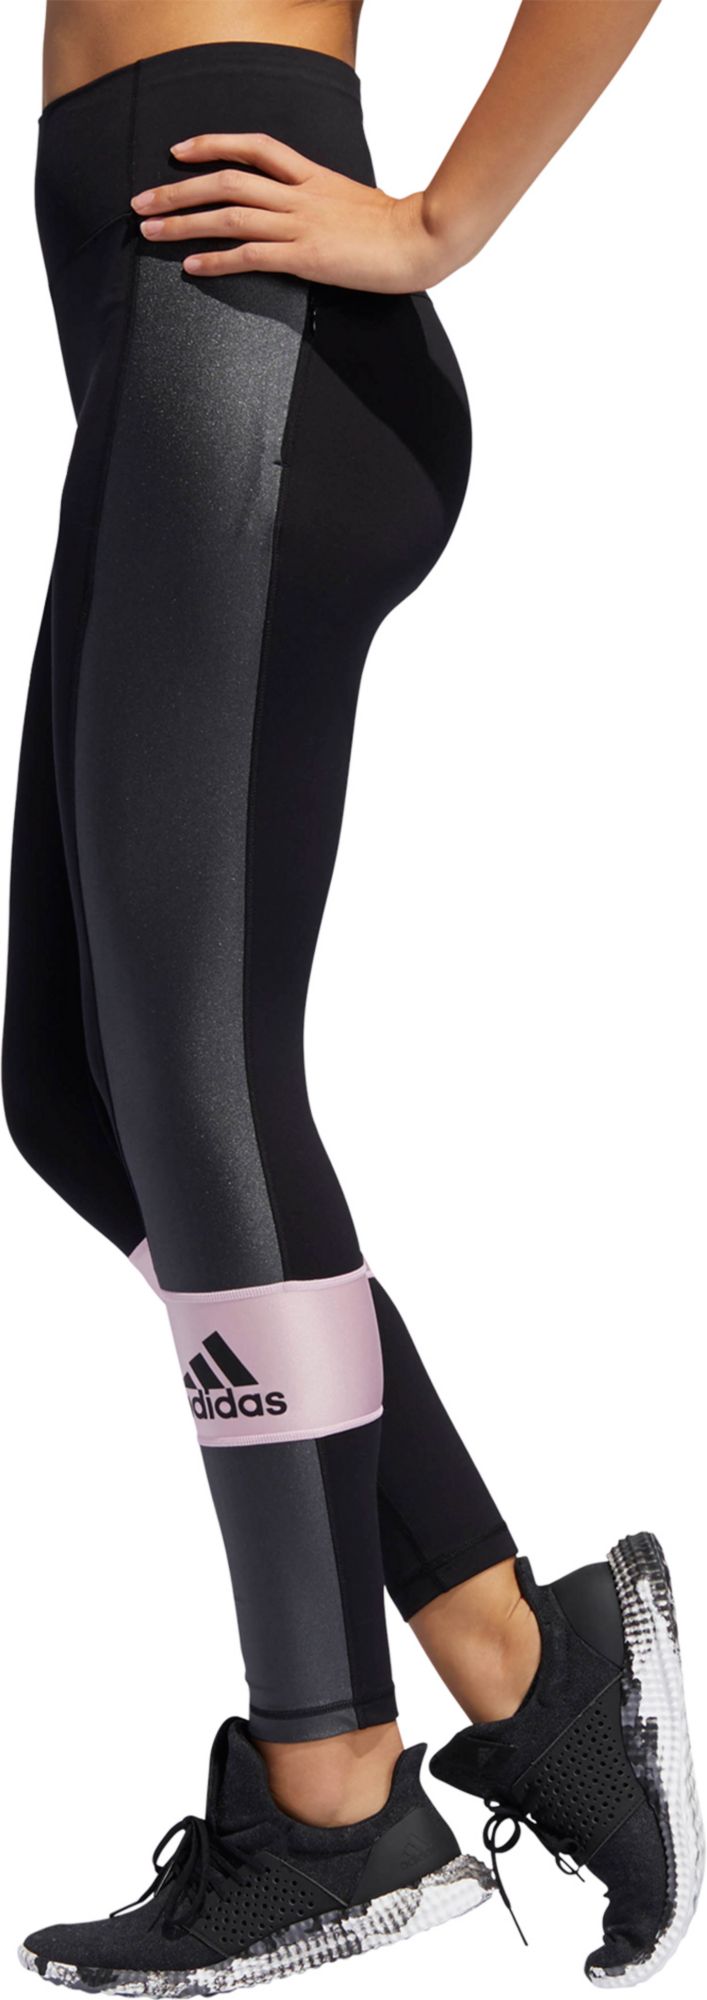 believe this high rise tights